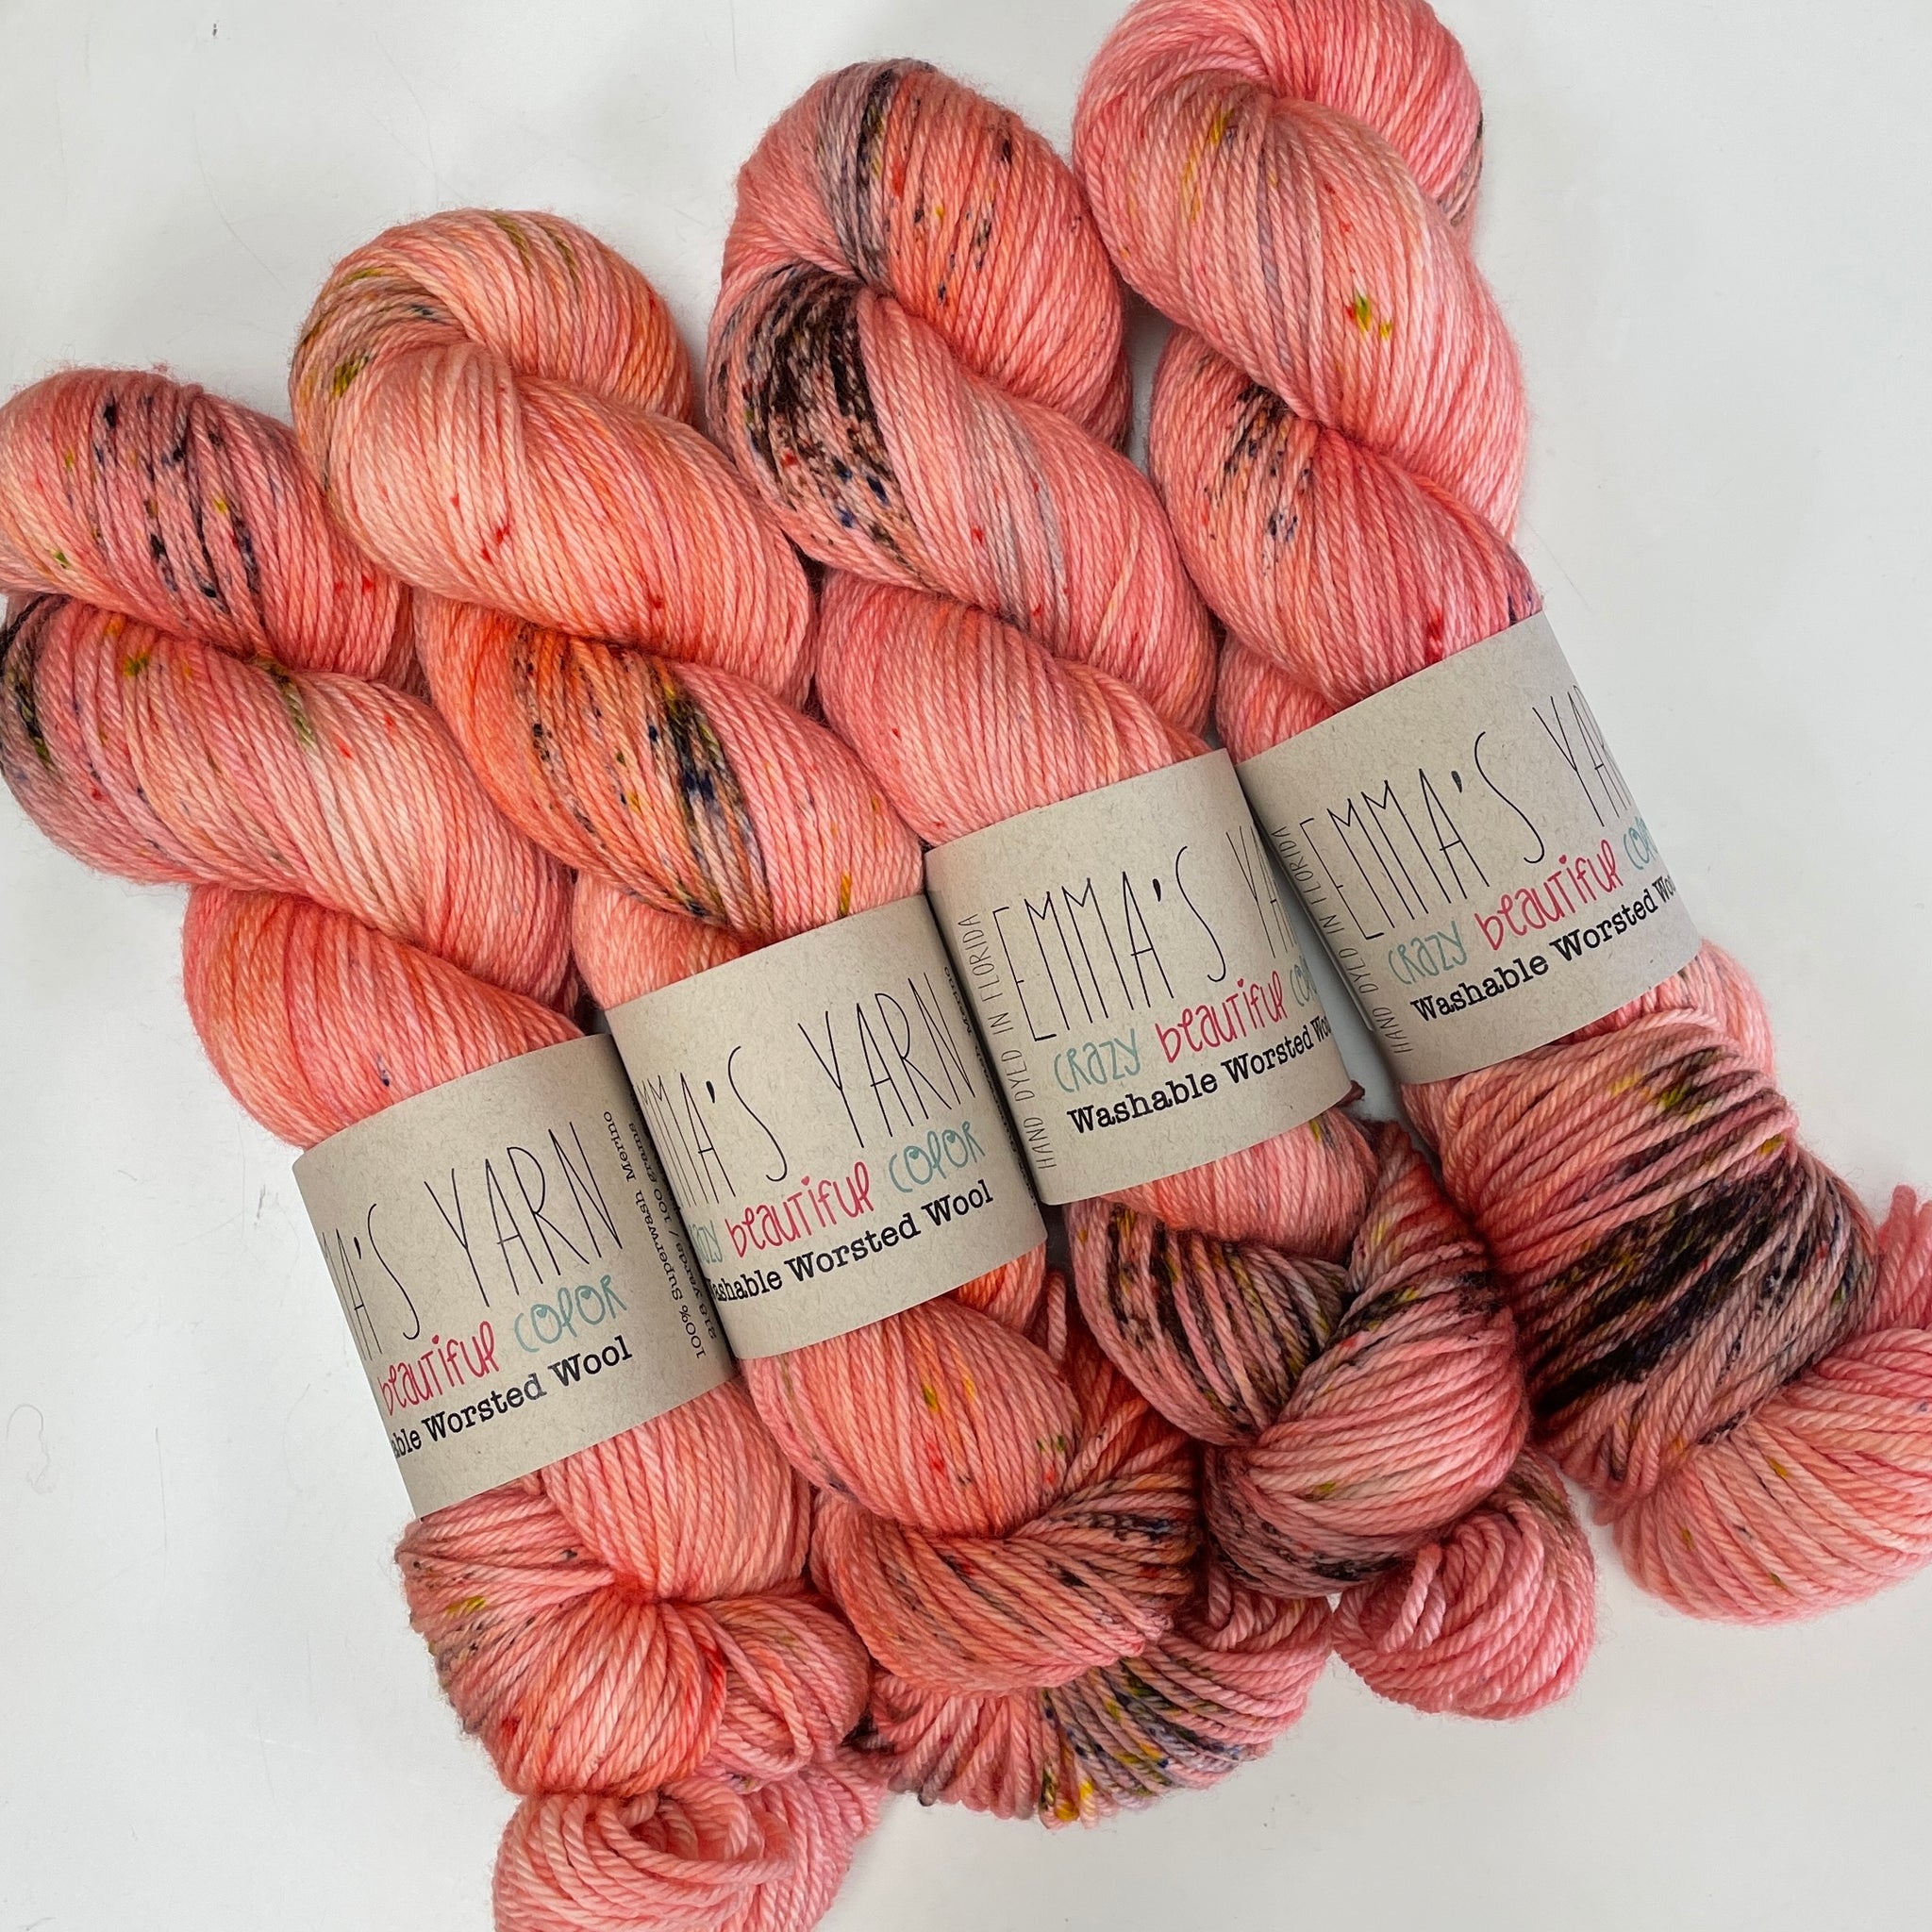 Better than the Hype - Washable Worsted Wool